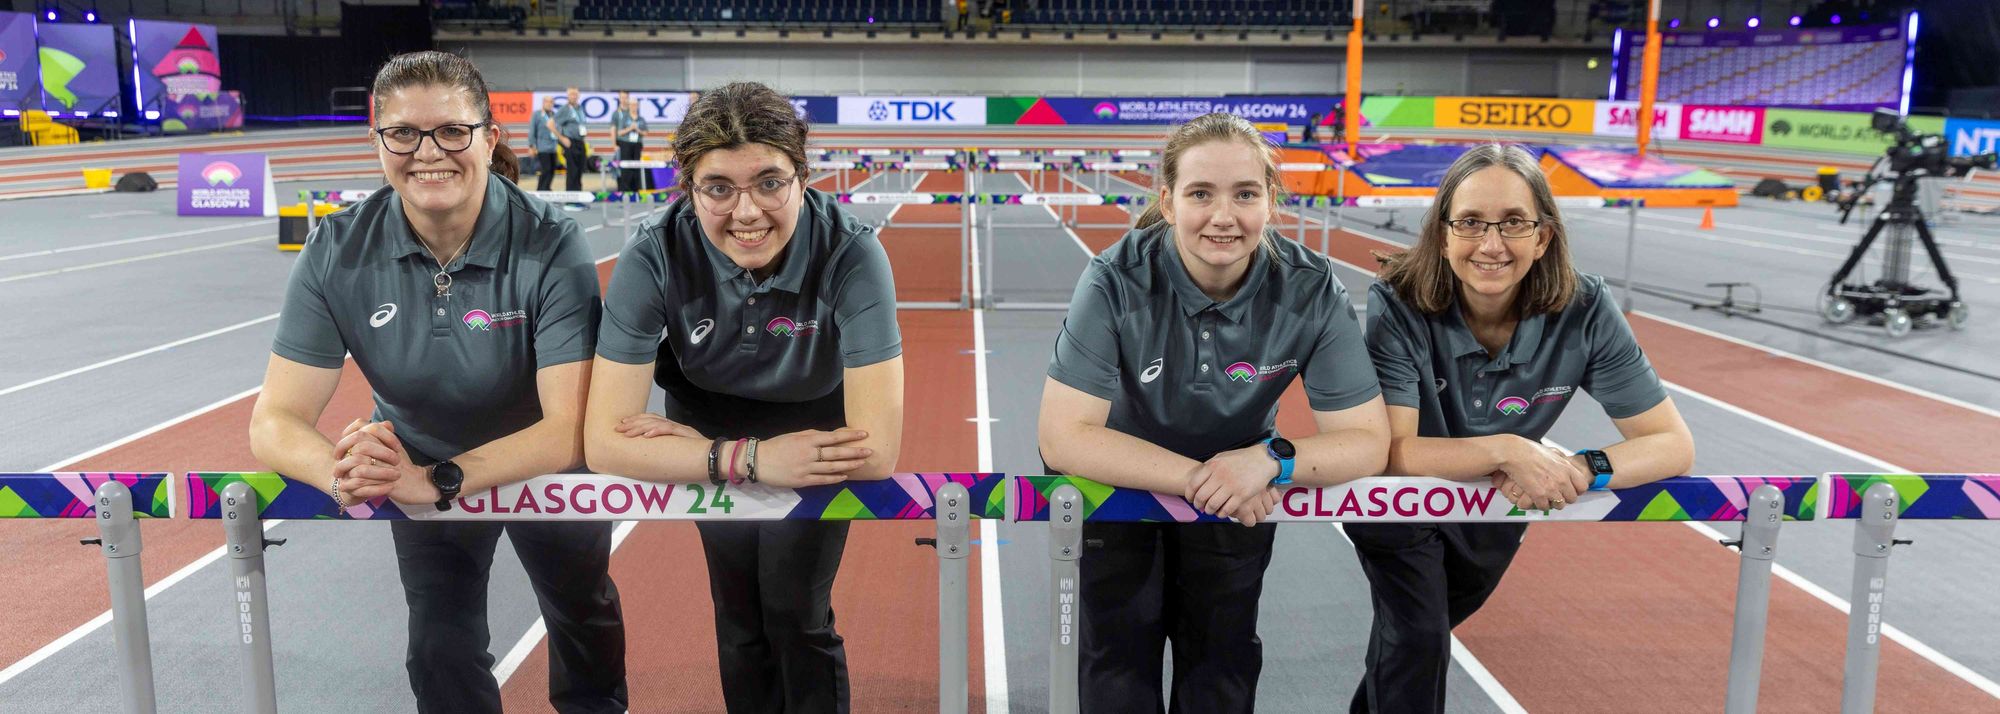 Two mother and daughter duos hope the pivotal part they played at the World Athletics Indoor Championships Glasgow 24 will inspire others to become athletics officials.